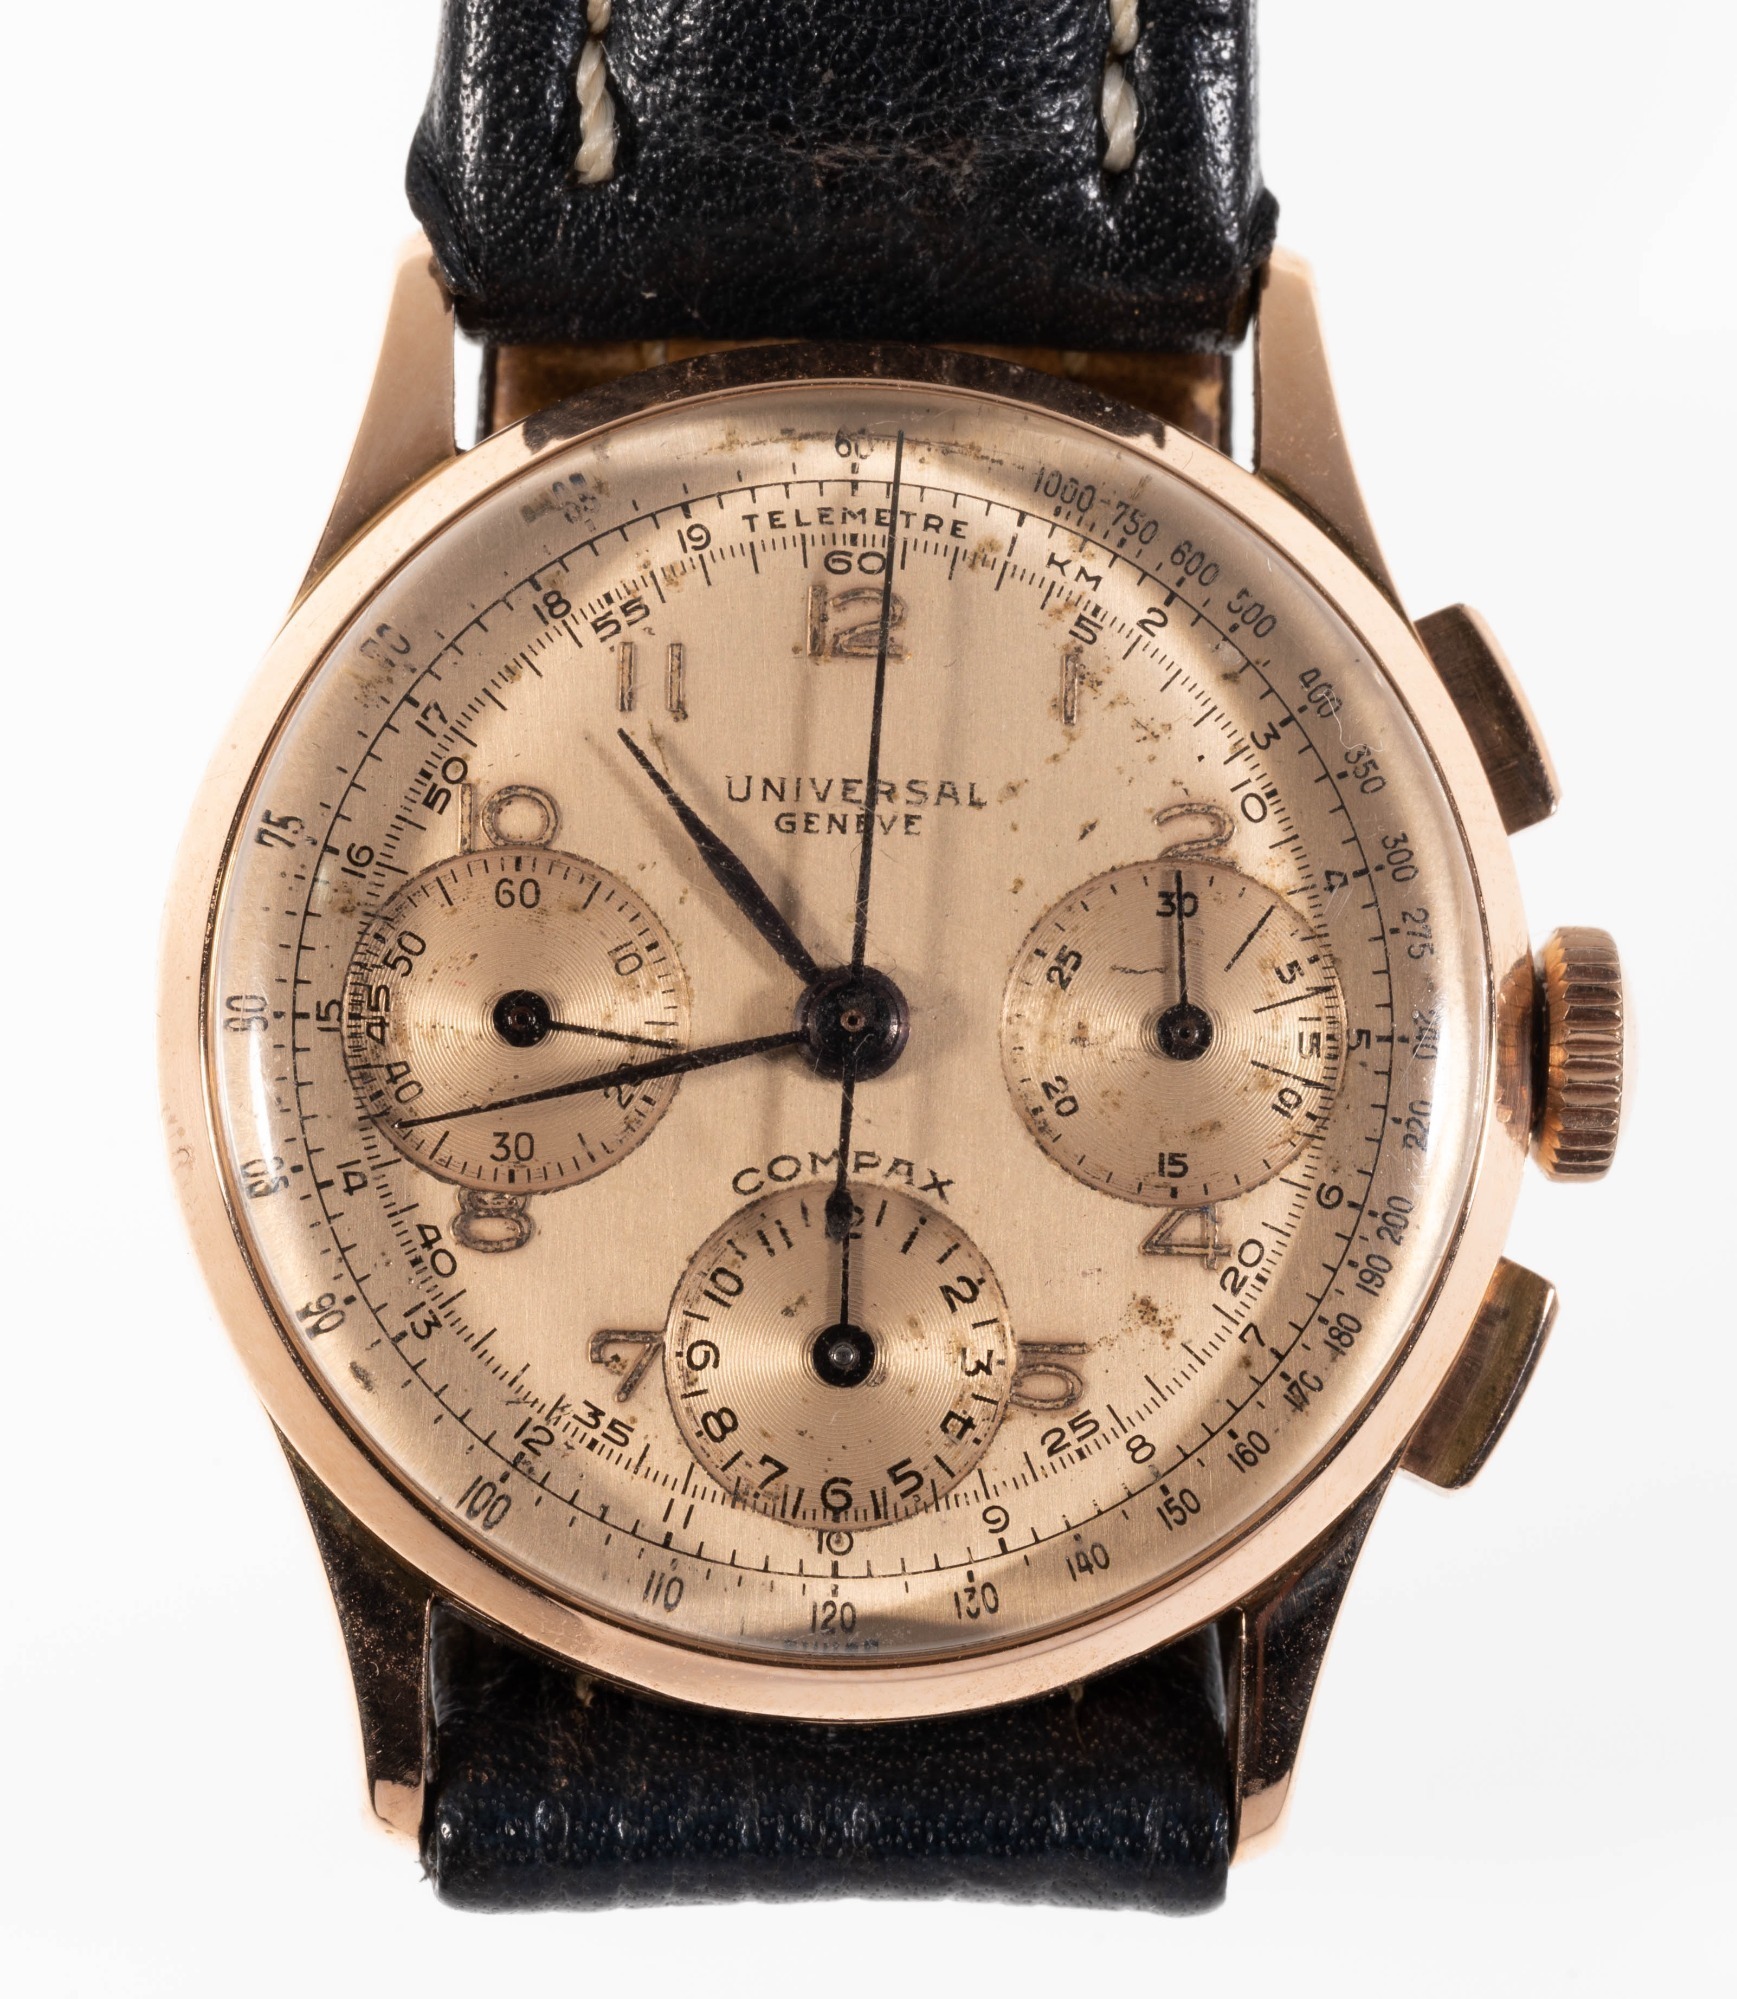 UNIVERSAL GENEVE COMPAX FOR BRAZILIAN AIR FORCE 18K ROSE GOLD CHRONOGRAPH WRISTWATCH